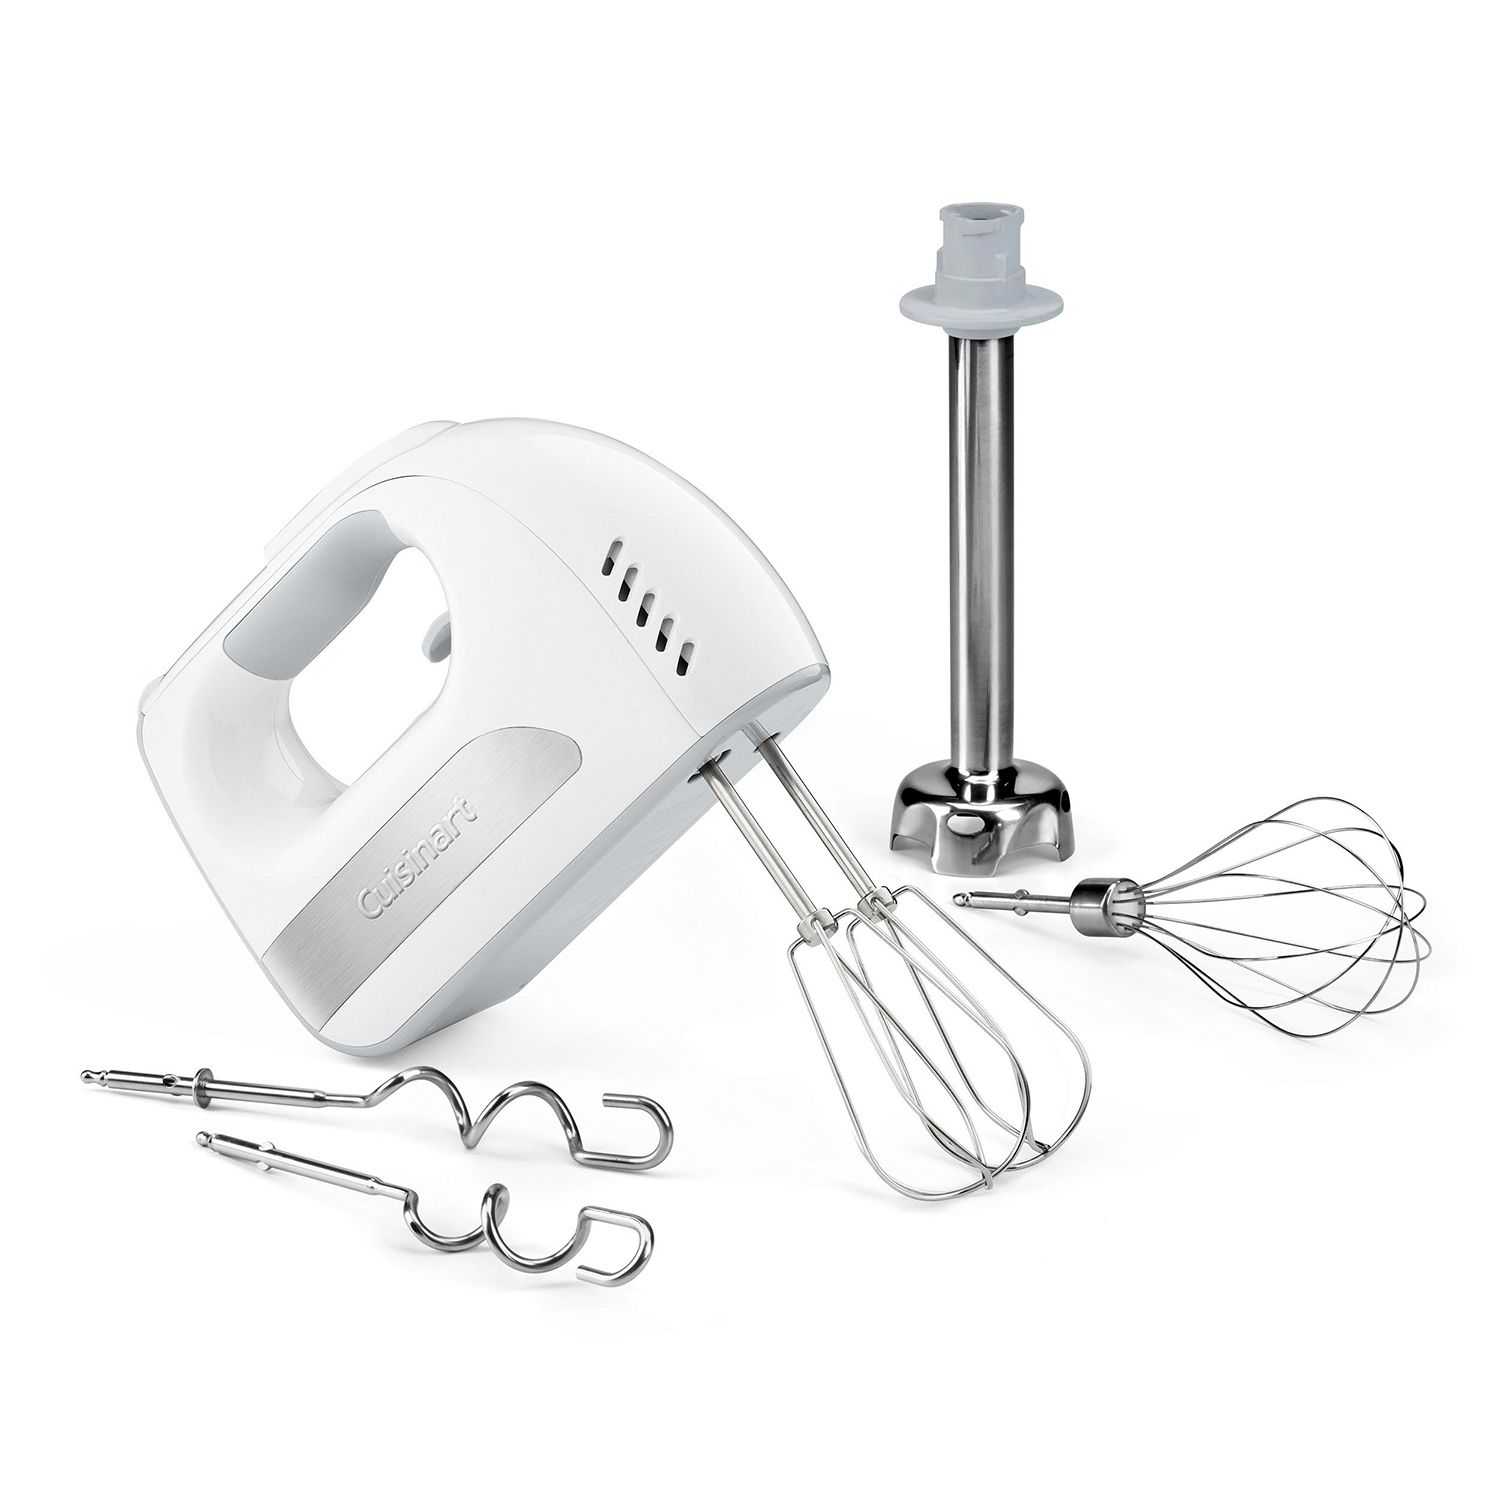 UpStart Components Hand Mixer Beaters Replacement for KitchenAid